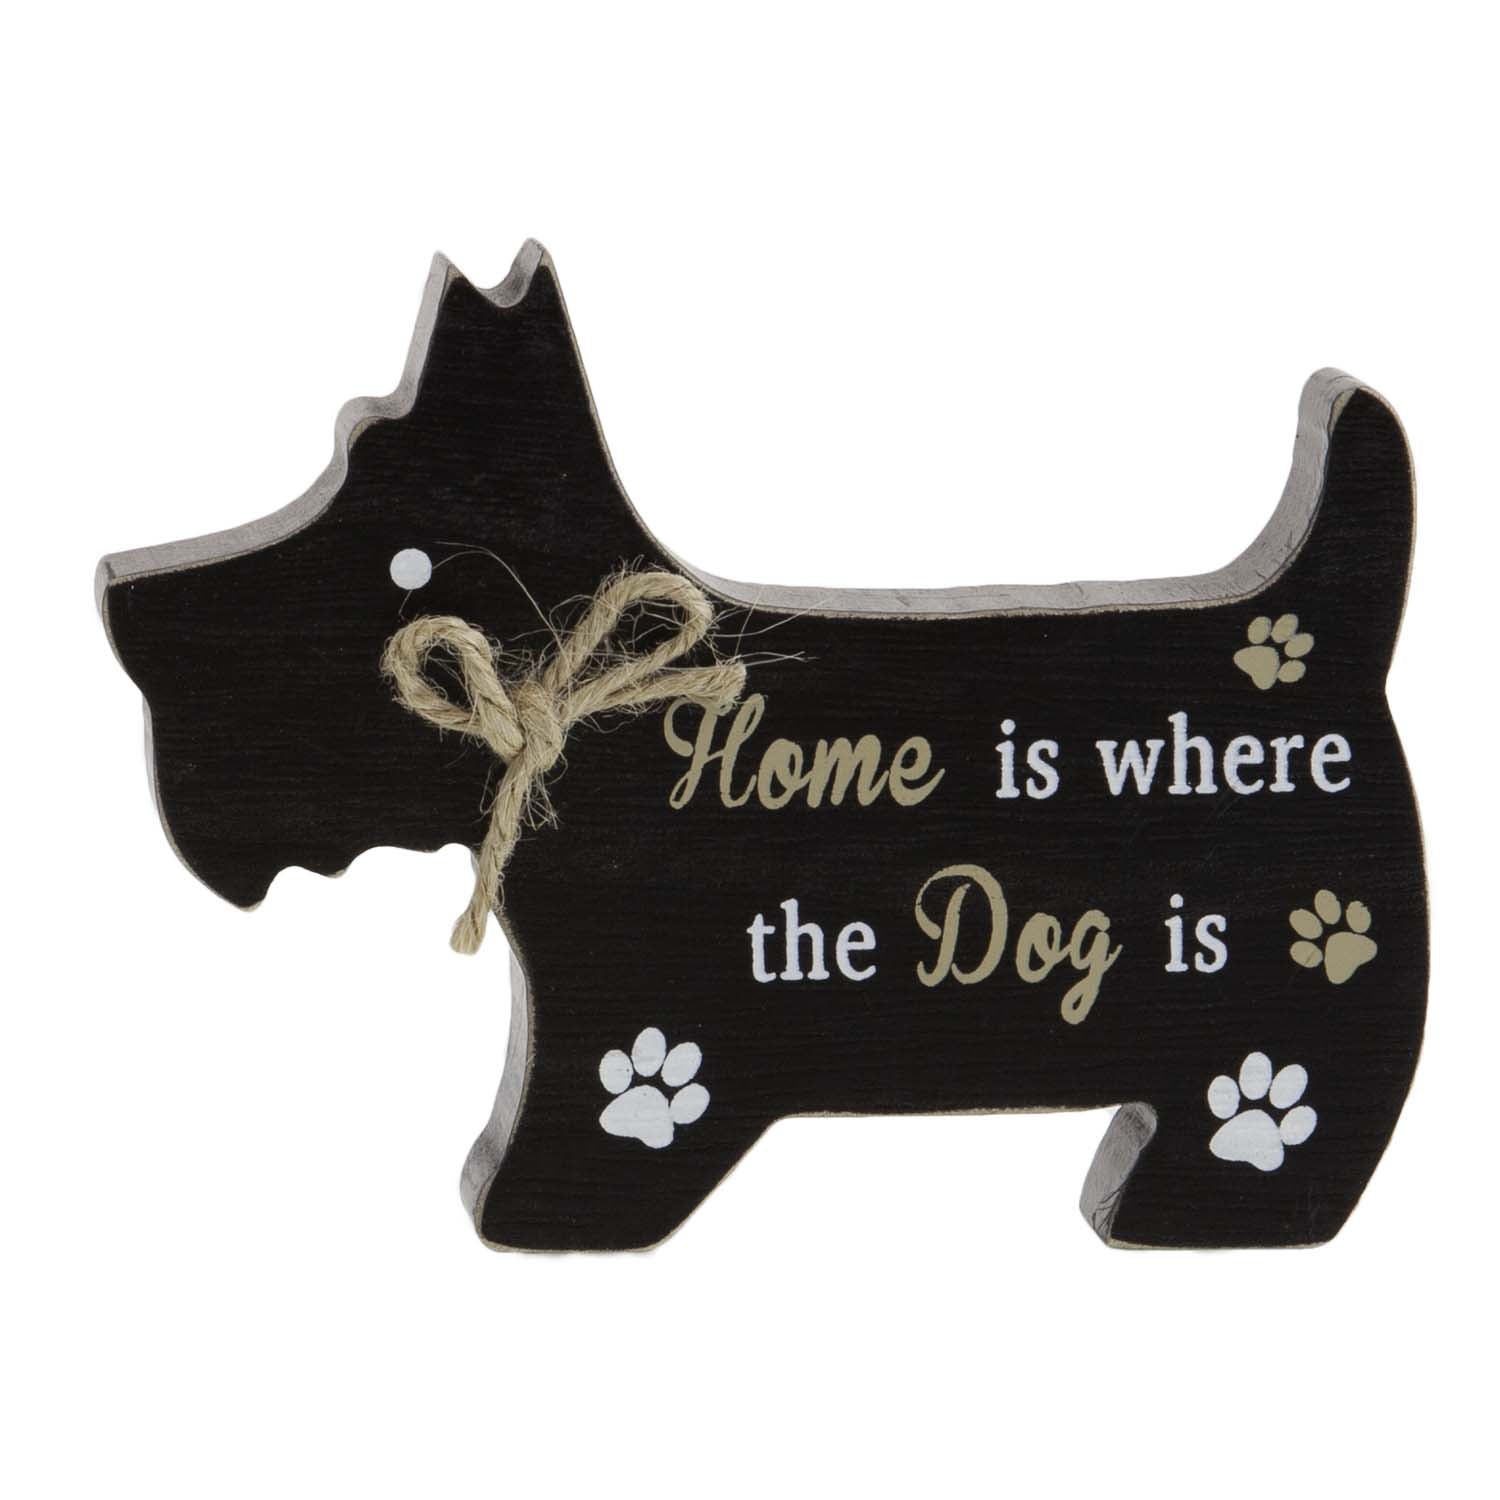 Dog Lover Gifts available at Dog Krazy Gifts – Westie Standing Dog Sign, Home is Where the Dog is, Just Part Of Our Collection Of Signs Available At www.dogkrazygifts.co.uk